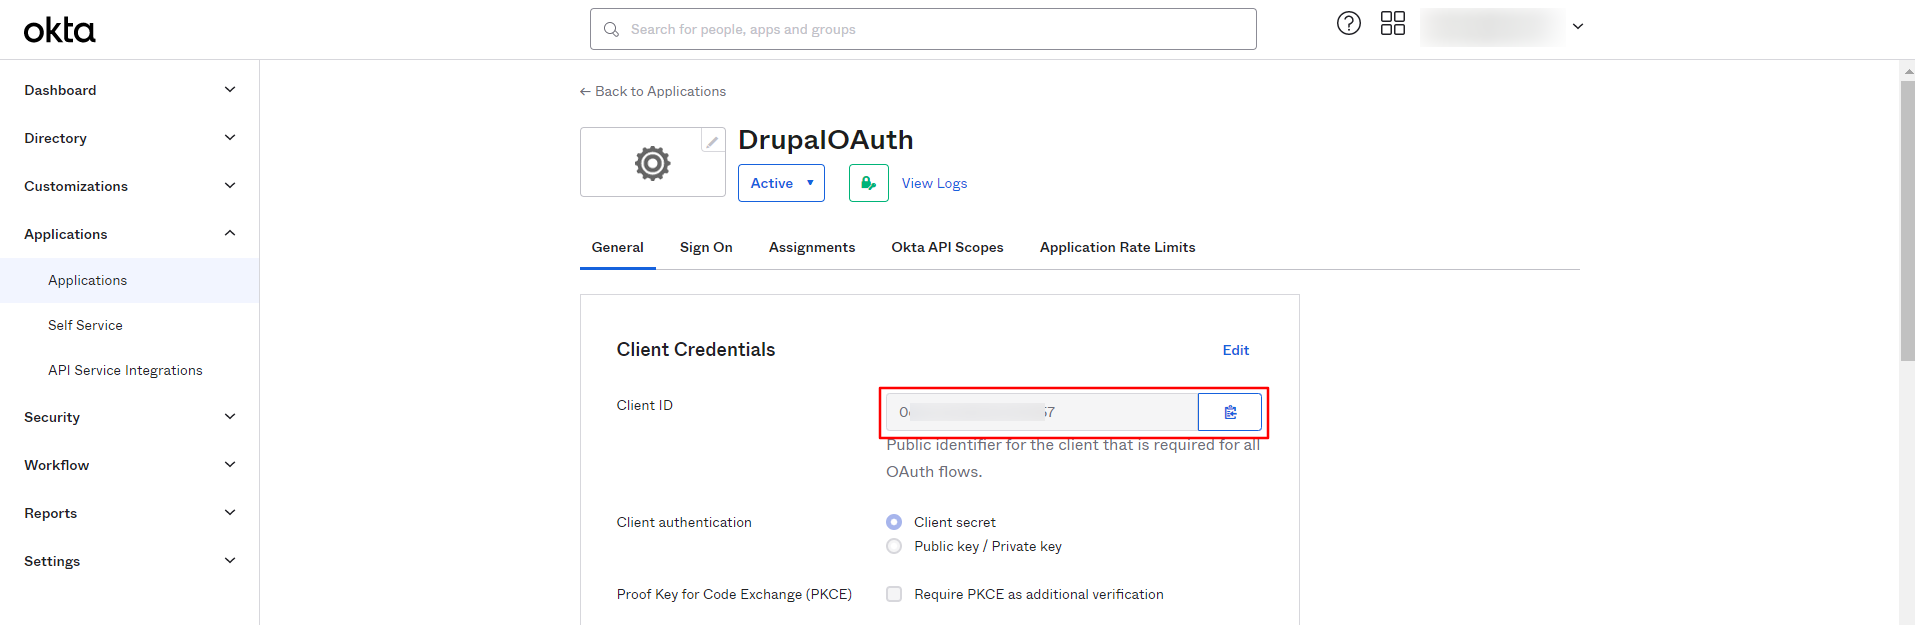 Drupal OAuth 2.0 OIDC Single Sign-on Okta SSO Client Credentials